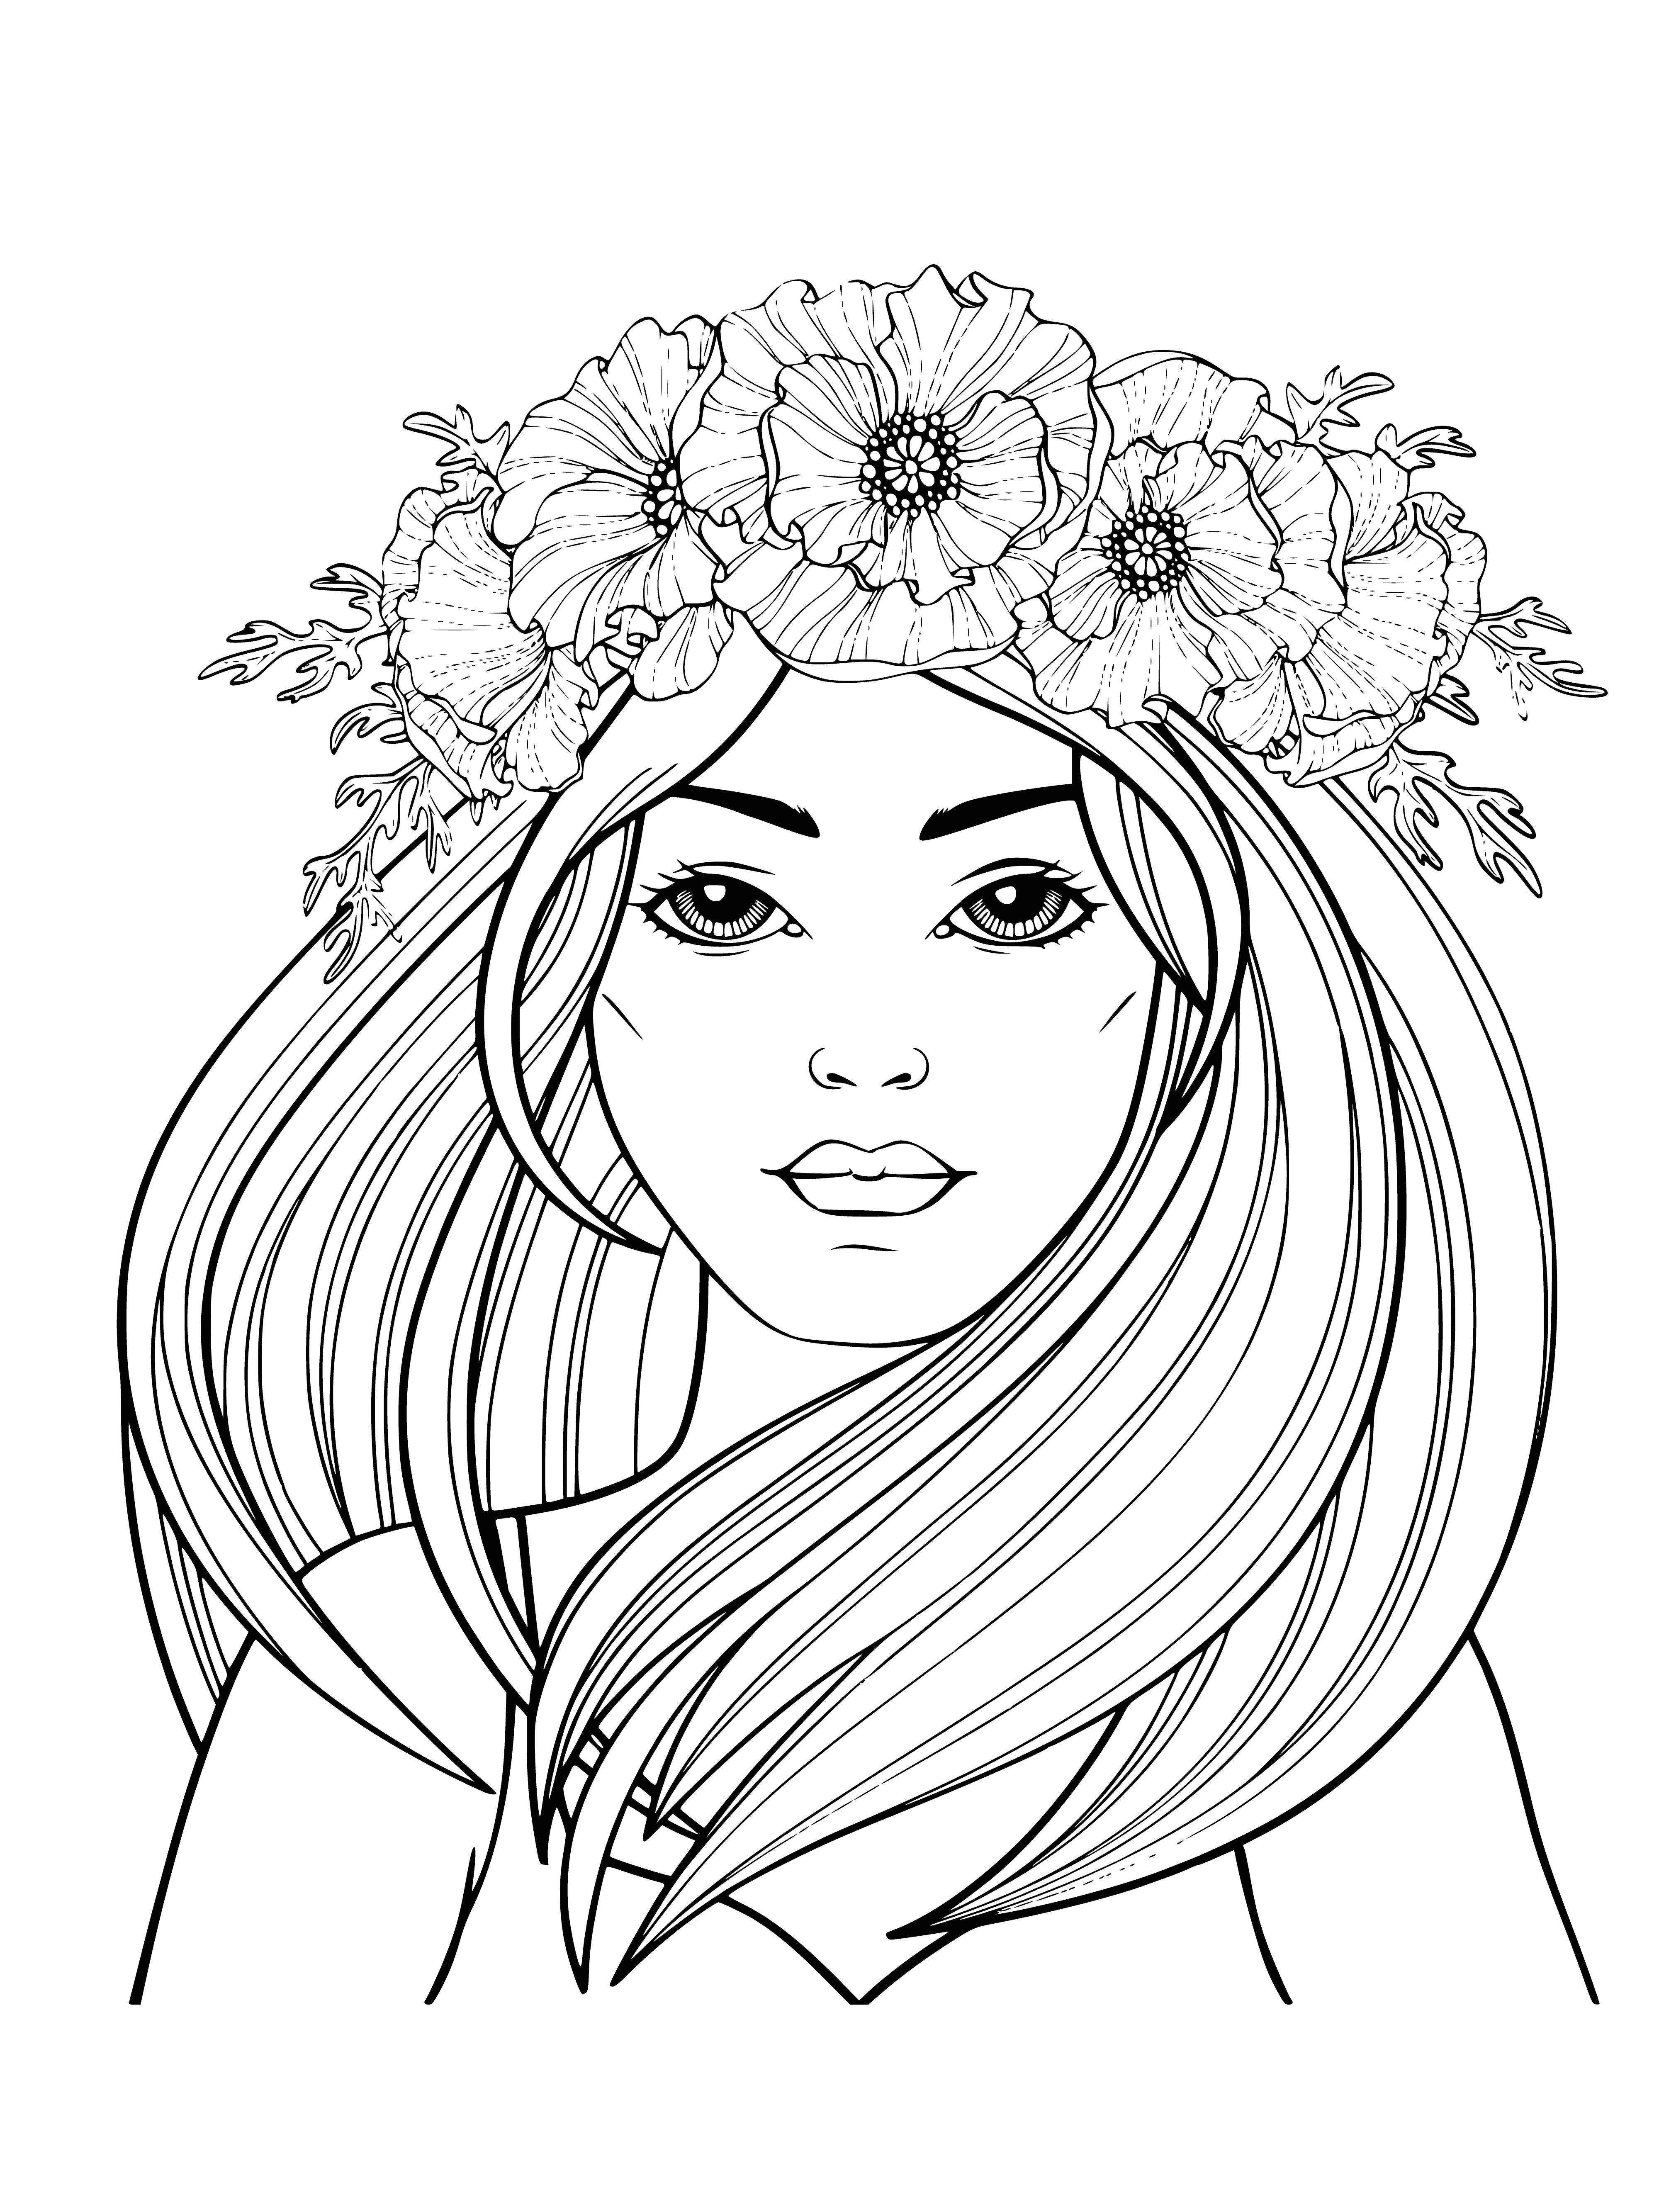 coloring page: Woman w/ long hair & delicate face is surrounded by intricate & detailed wreath of flowers & leaves, giving off peacefulness & beauty.